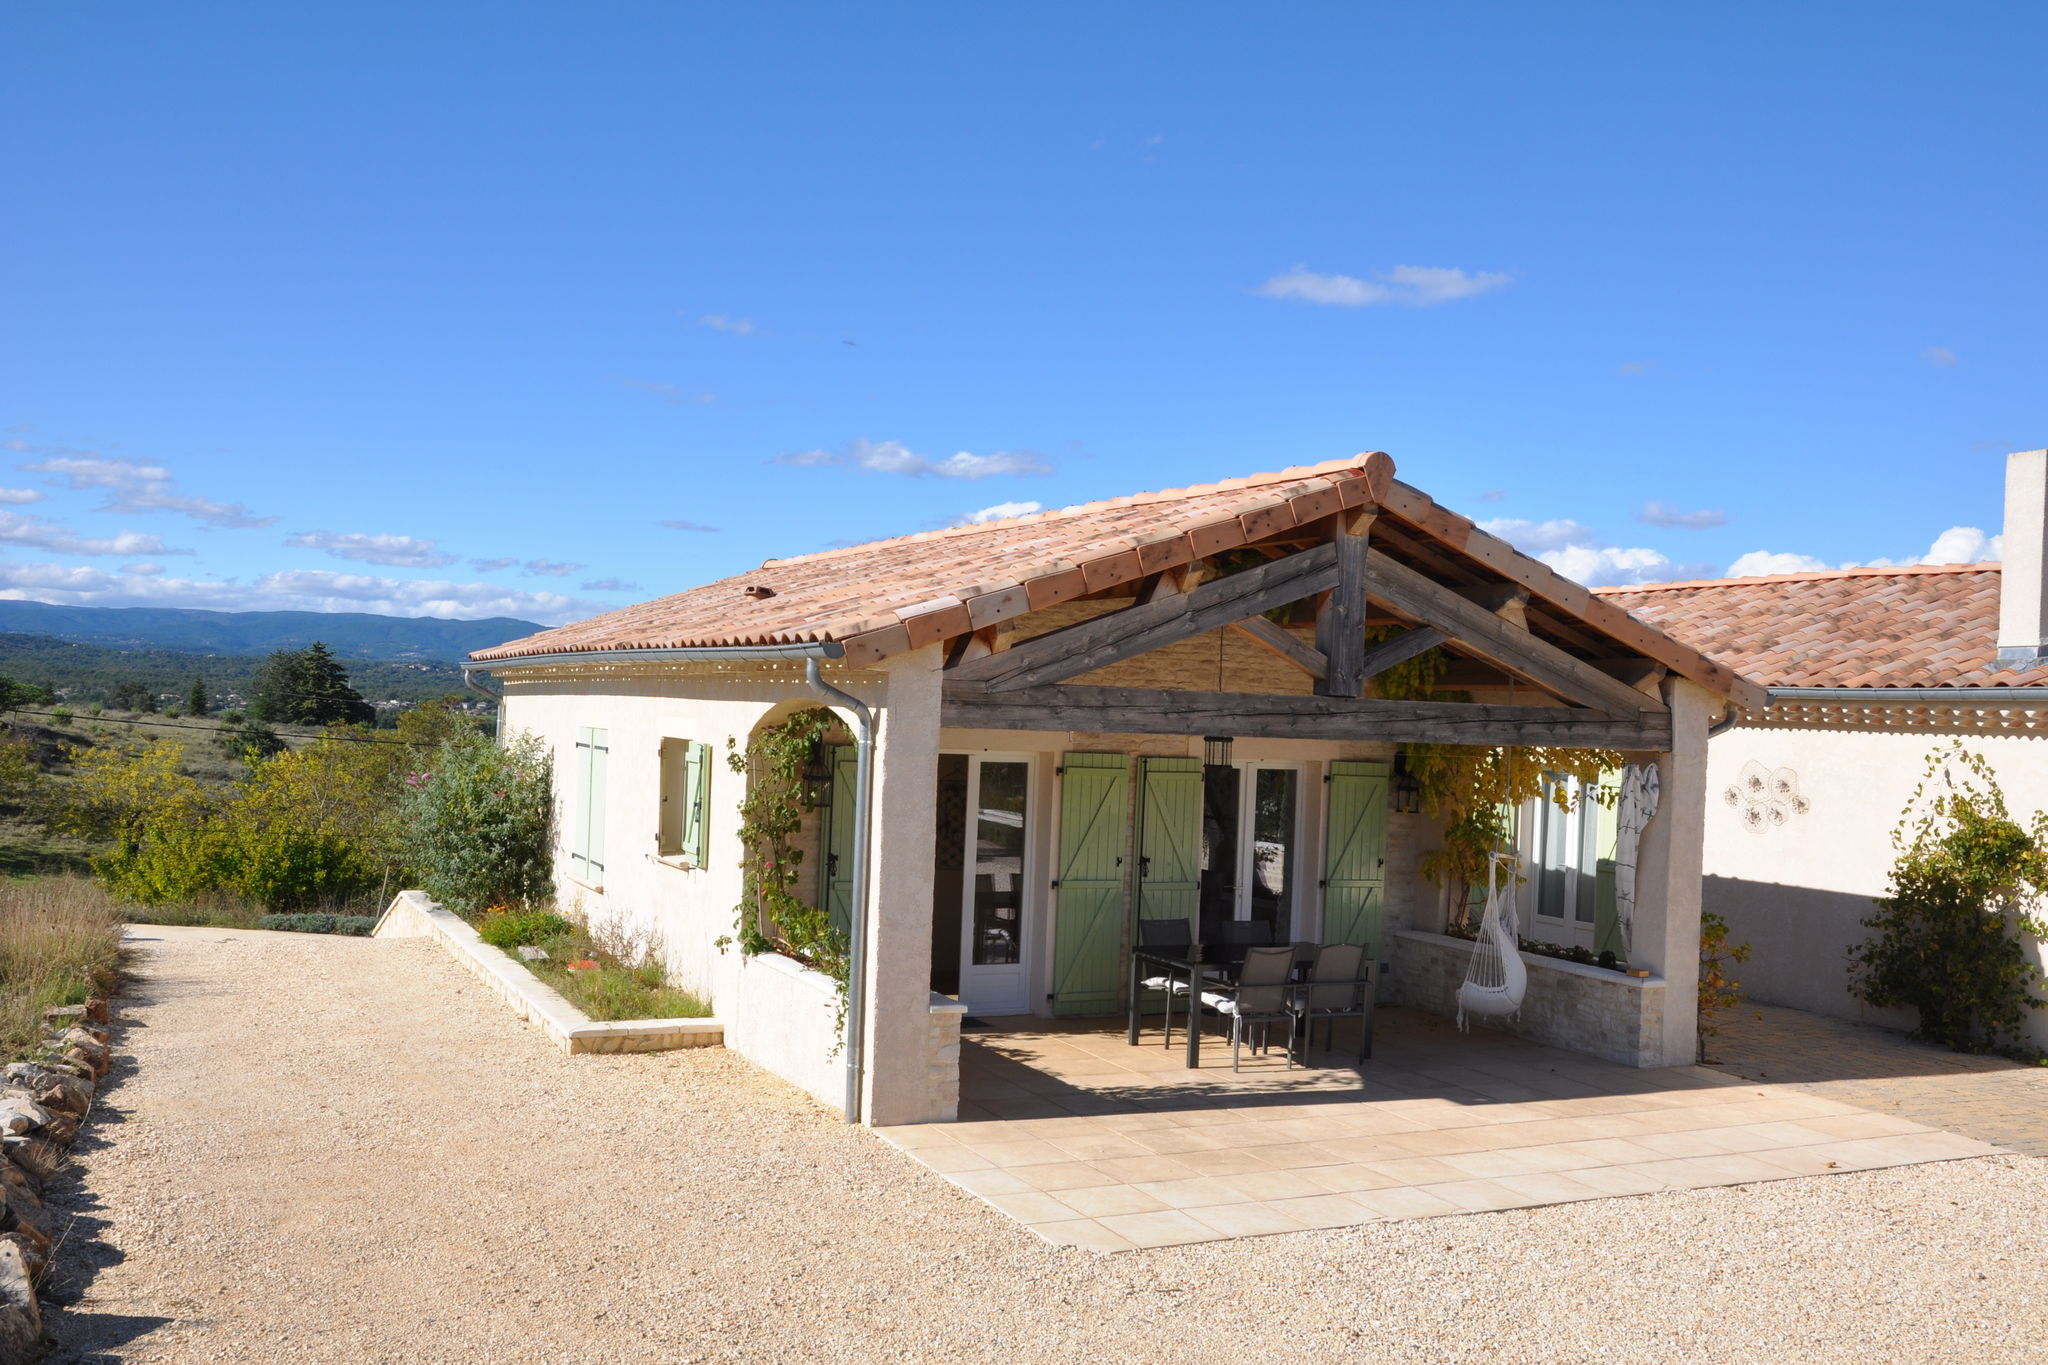 Countryside villa in Ardeche with gorgeous views